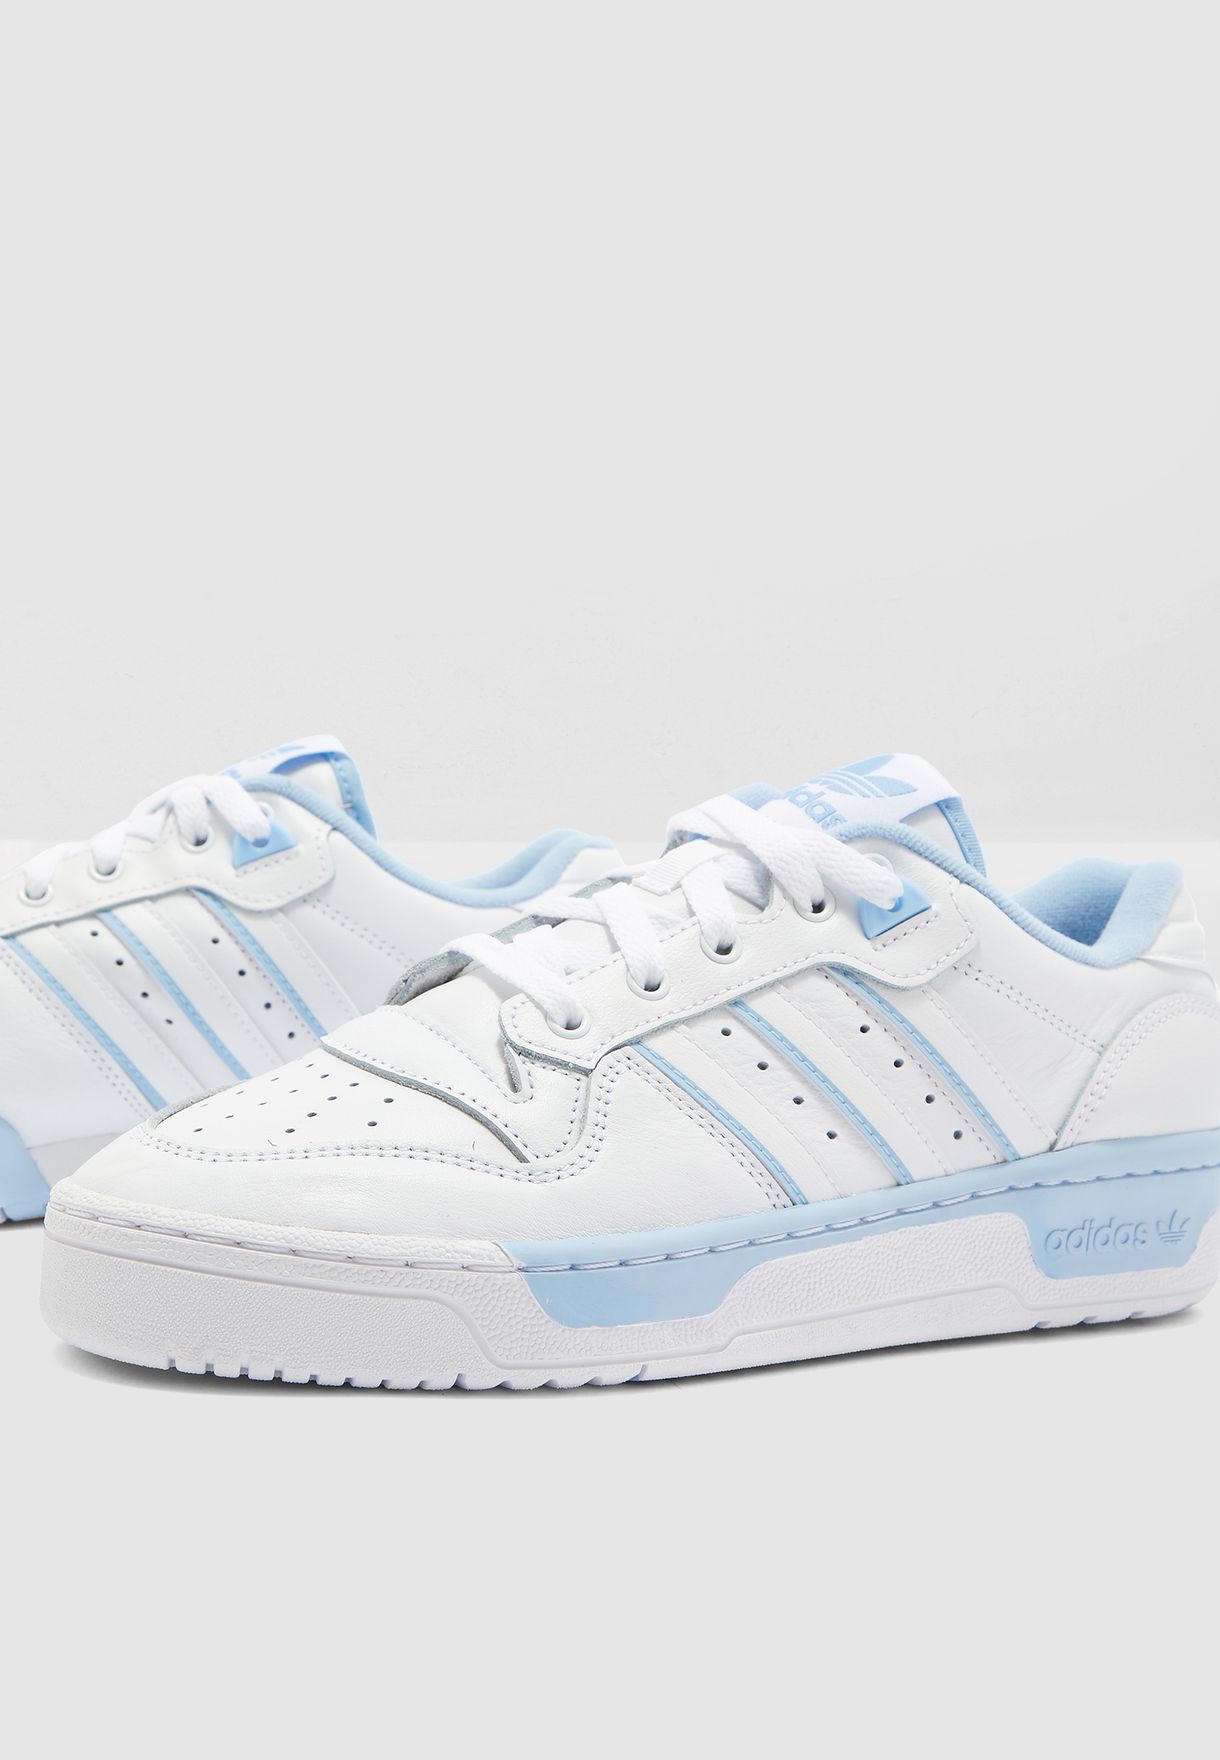 adidas rivalry low womens